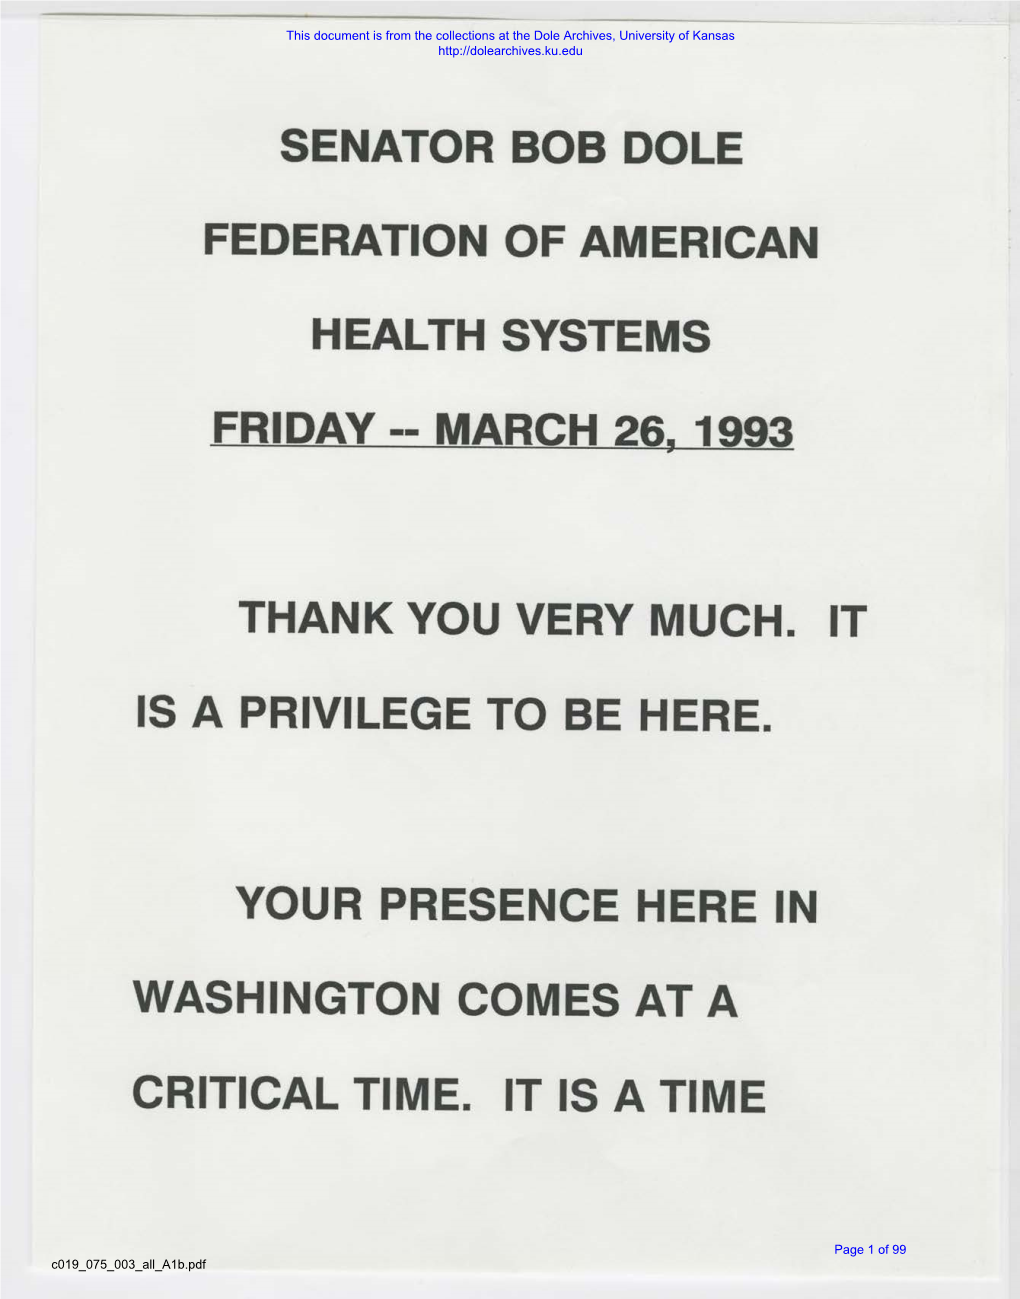 Senator Bob Dole Federation of American Heal Th Systems Friday -- March 26, Thank You Very Much. It Is a Privilege to Be Here